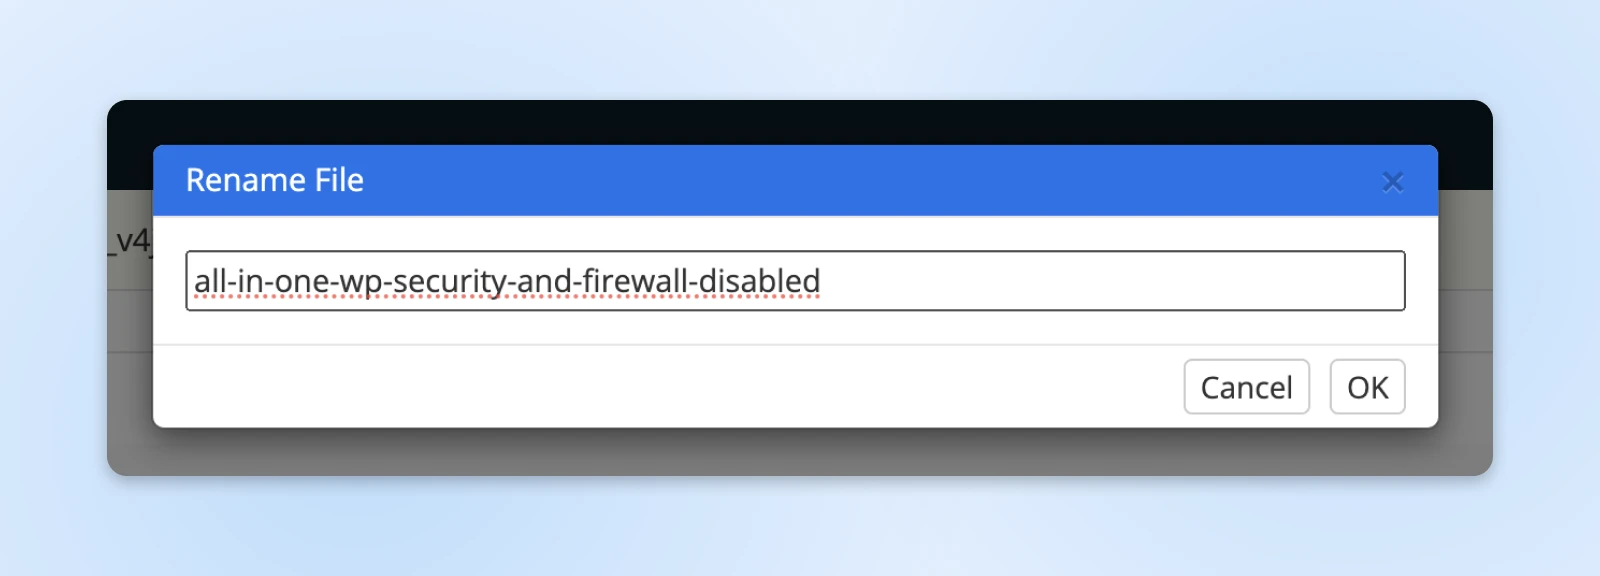 Dialog box to rename a file, with "all-in-one-wp-security-and-firewall-disabled" entered as the new filename.